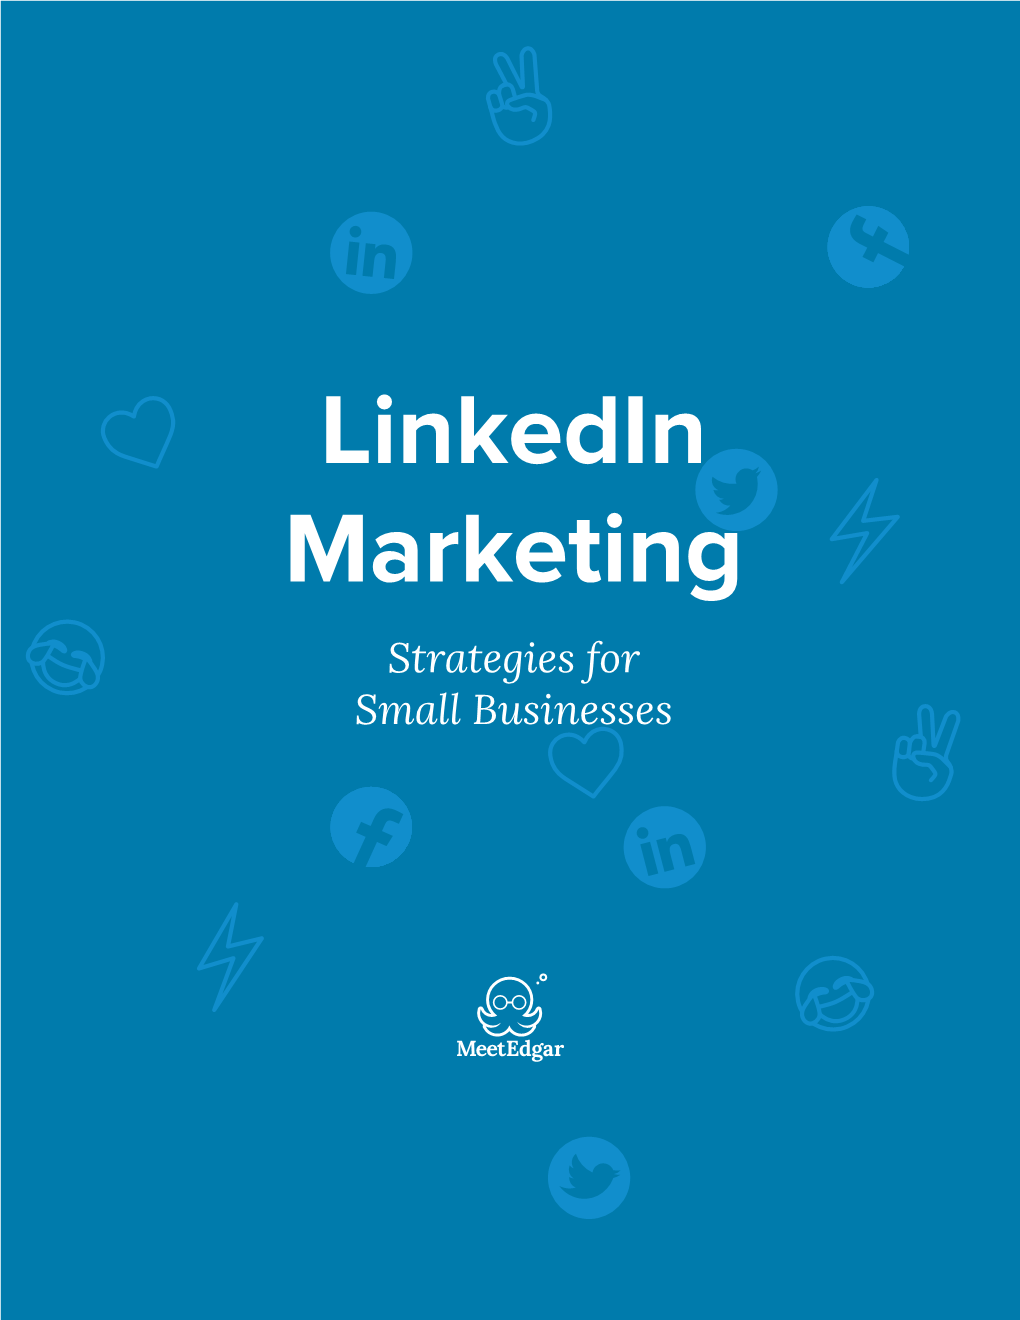 Linkedin Marketing Strategies for Small Businesses Introduction